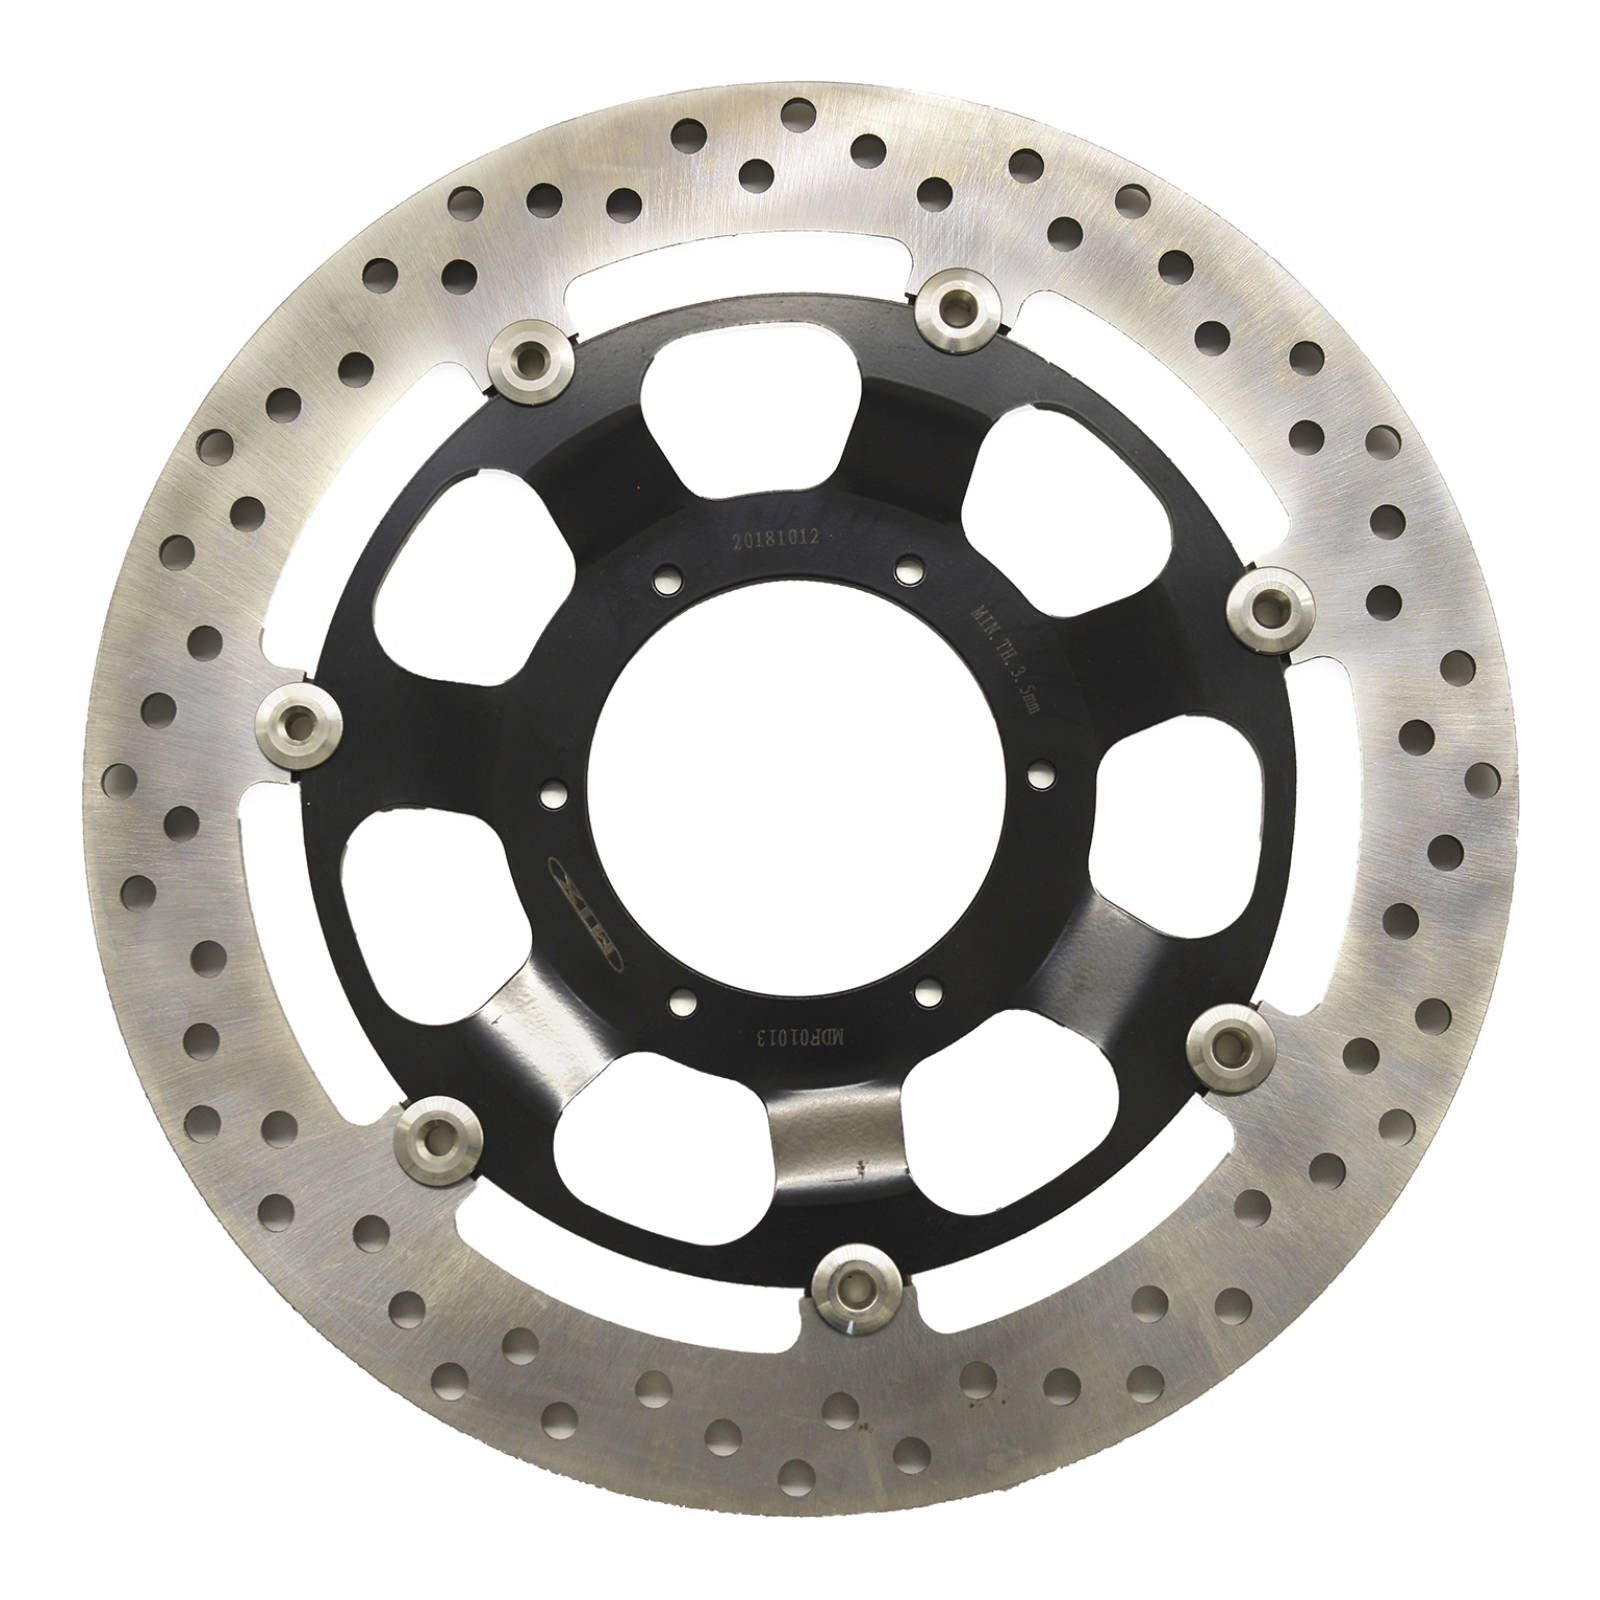 New MTX Brake Disc Rotor Floating Type - Front #MDF01013